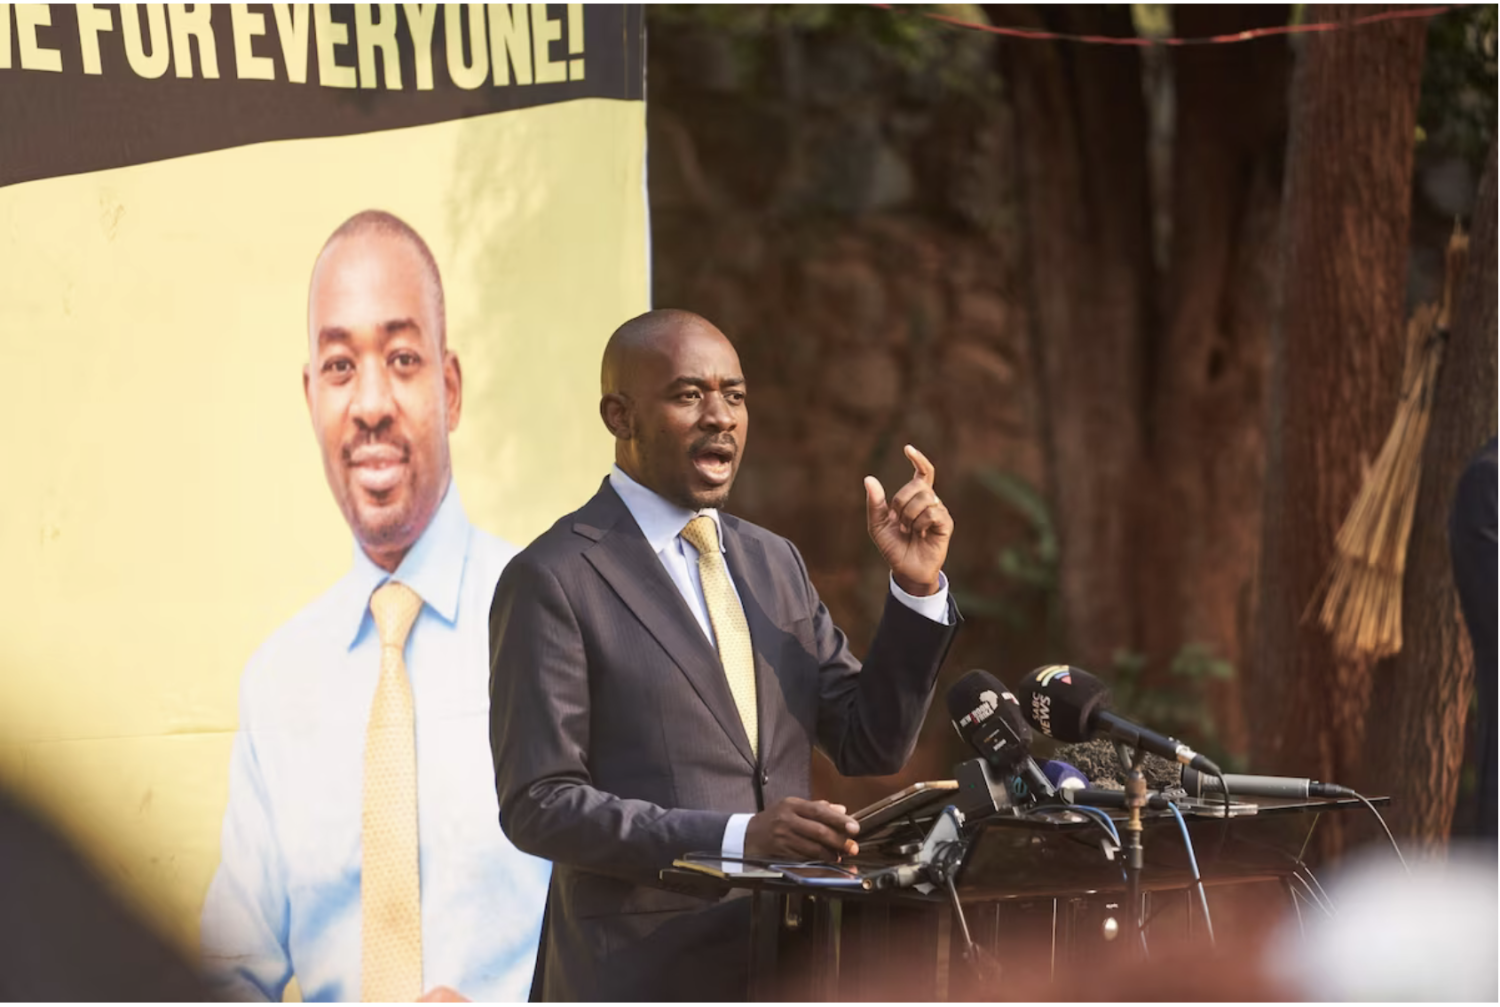 Opposition leader Nelson Chamisa, who challenged incumbent Zimbabwean President Emmerson Mnangagwa, addresses a news conference in Zimbabwe's capital, Harare, on Sunday. (Zinyange Auntony/AFP/Getty Images)